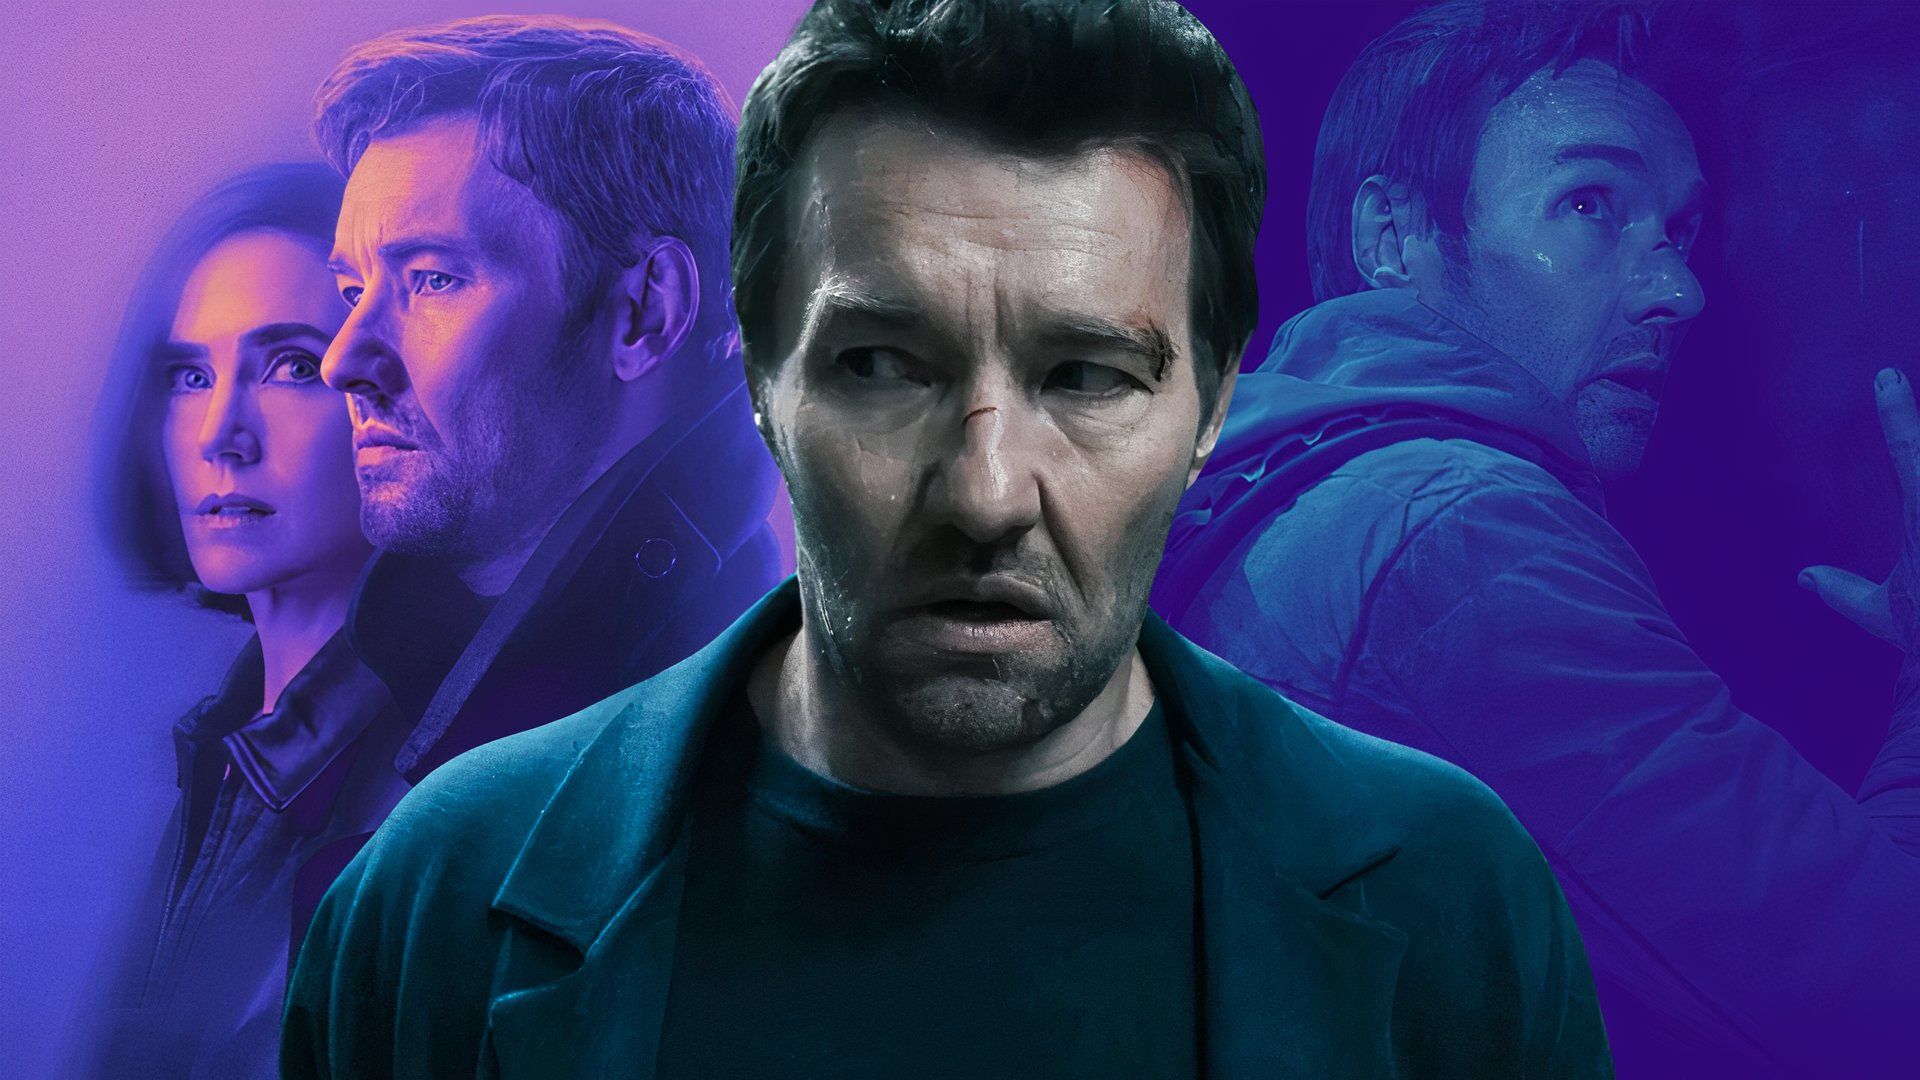 Joel Edgerton with cuts on his face alongside Jennifer Connelly in an edited image of Dark Matter